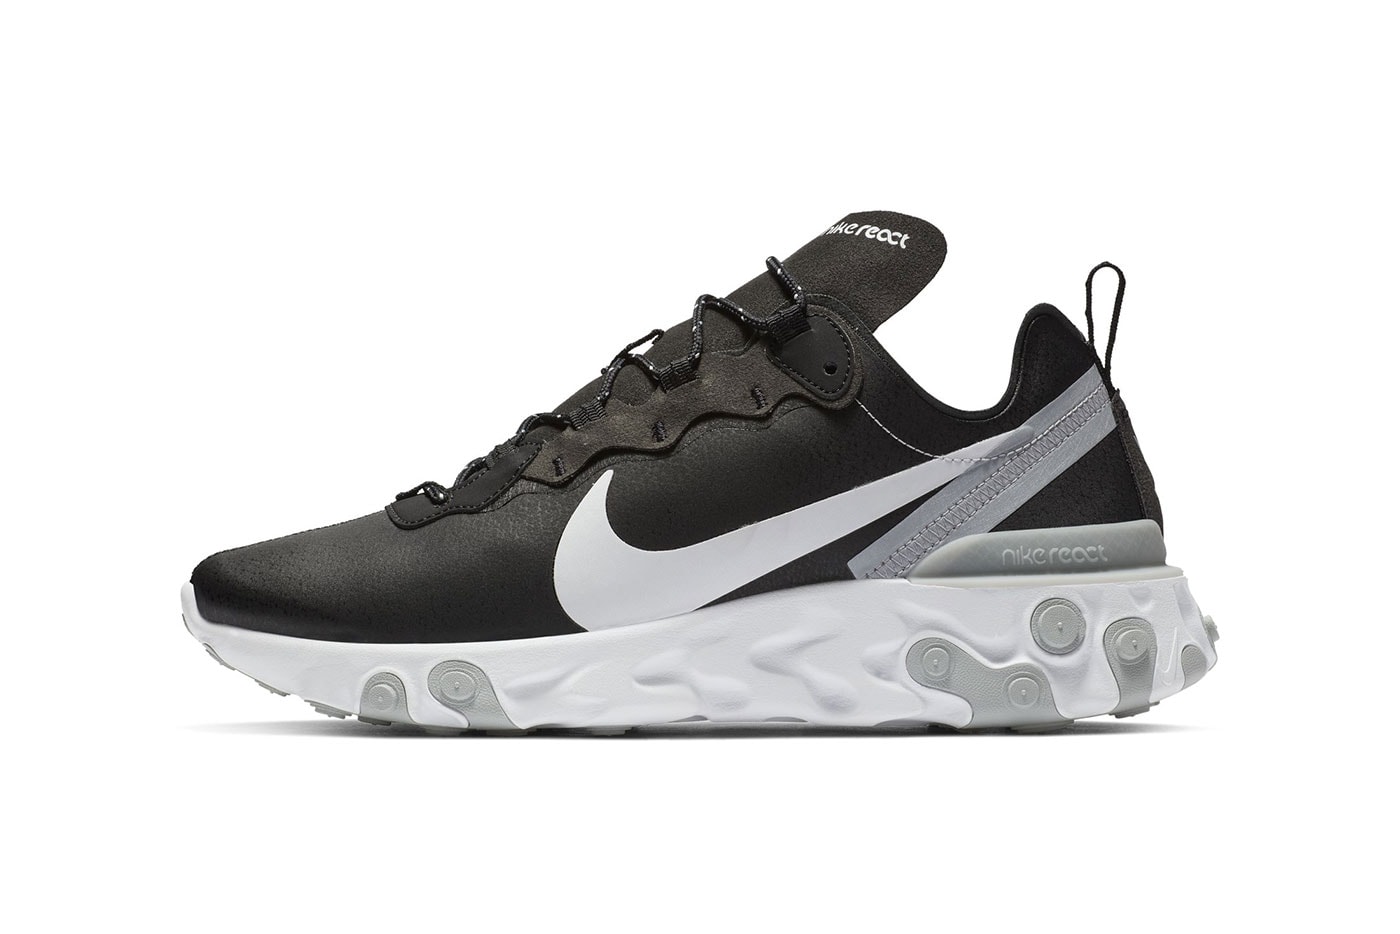 Nike react element 55 black white colorway sneaker grey release date info price